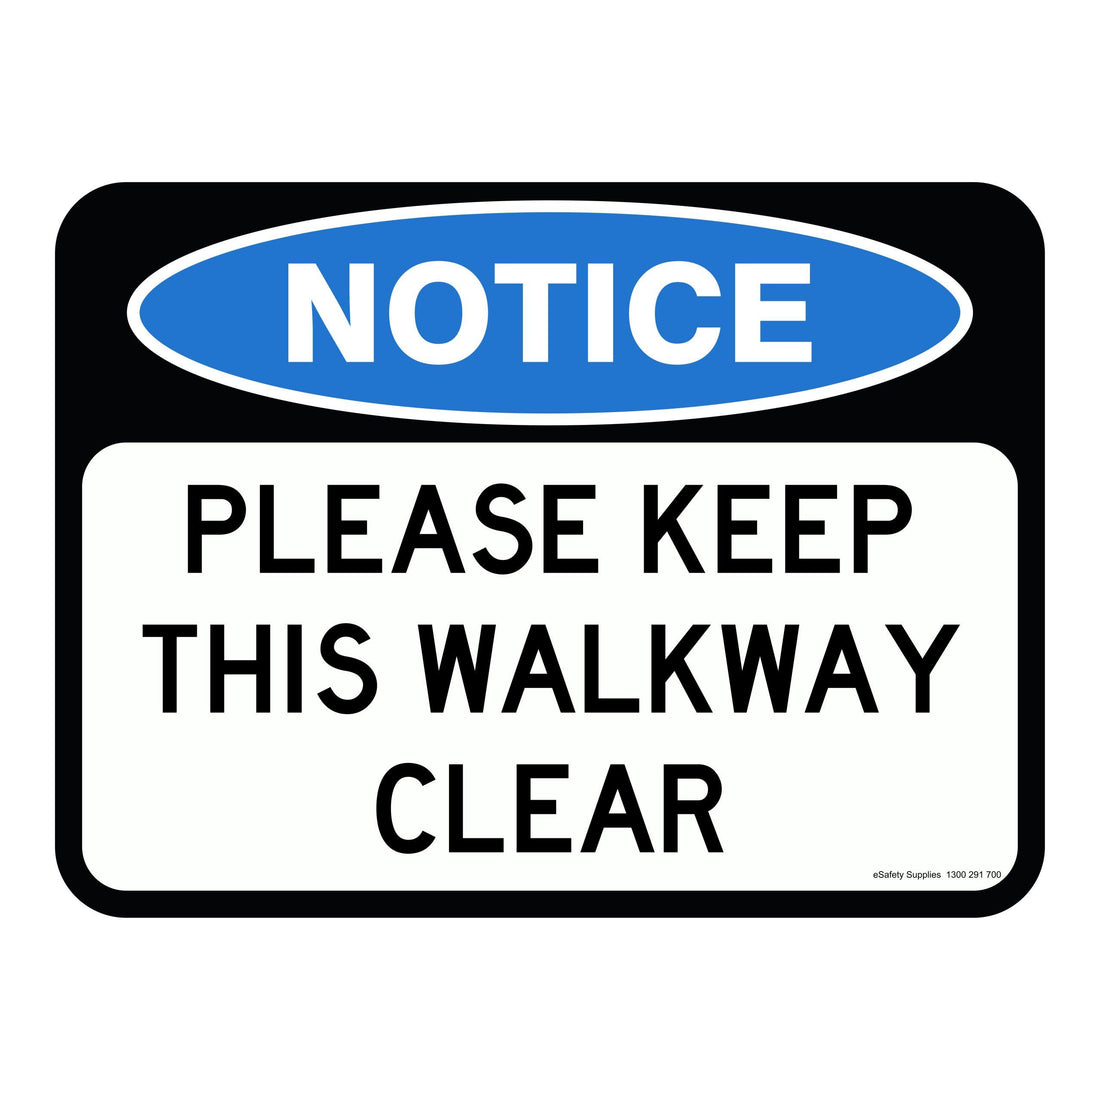 NOTICE - PLEASE KEEP THIS WALKWAY CLEAR